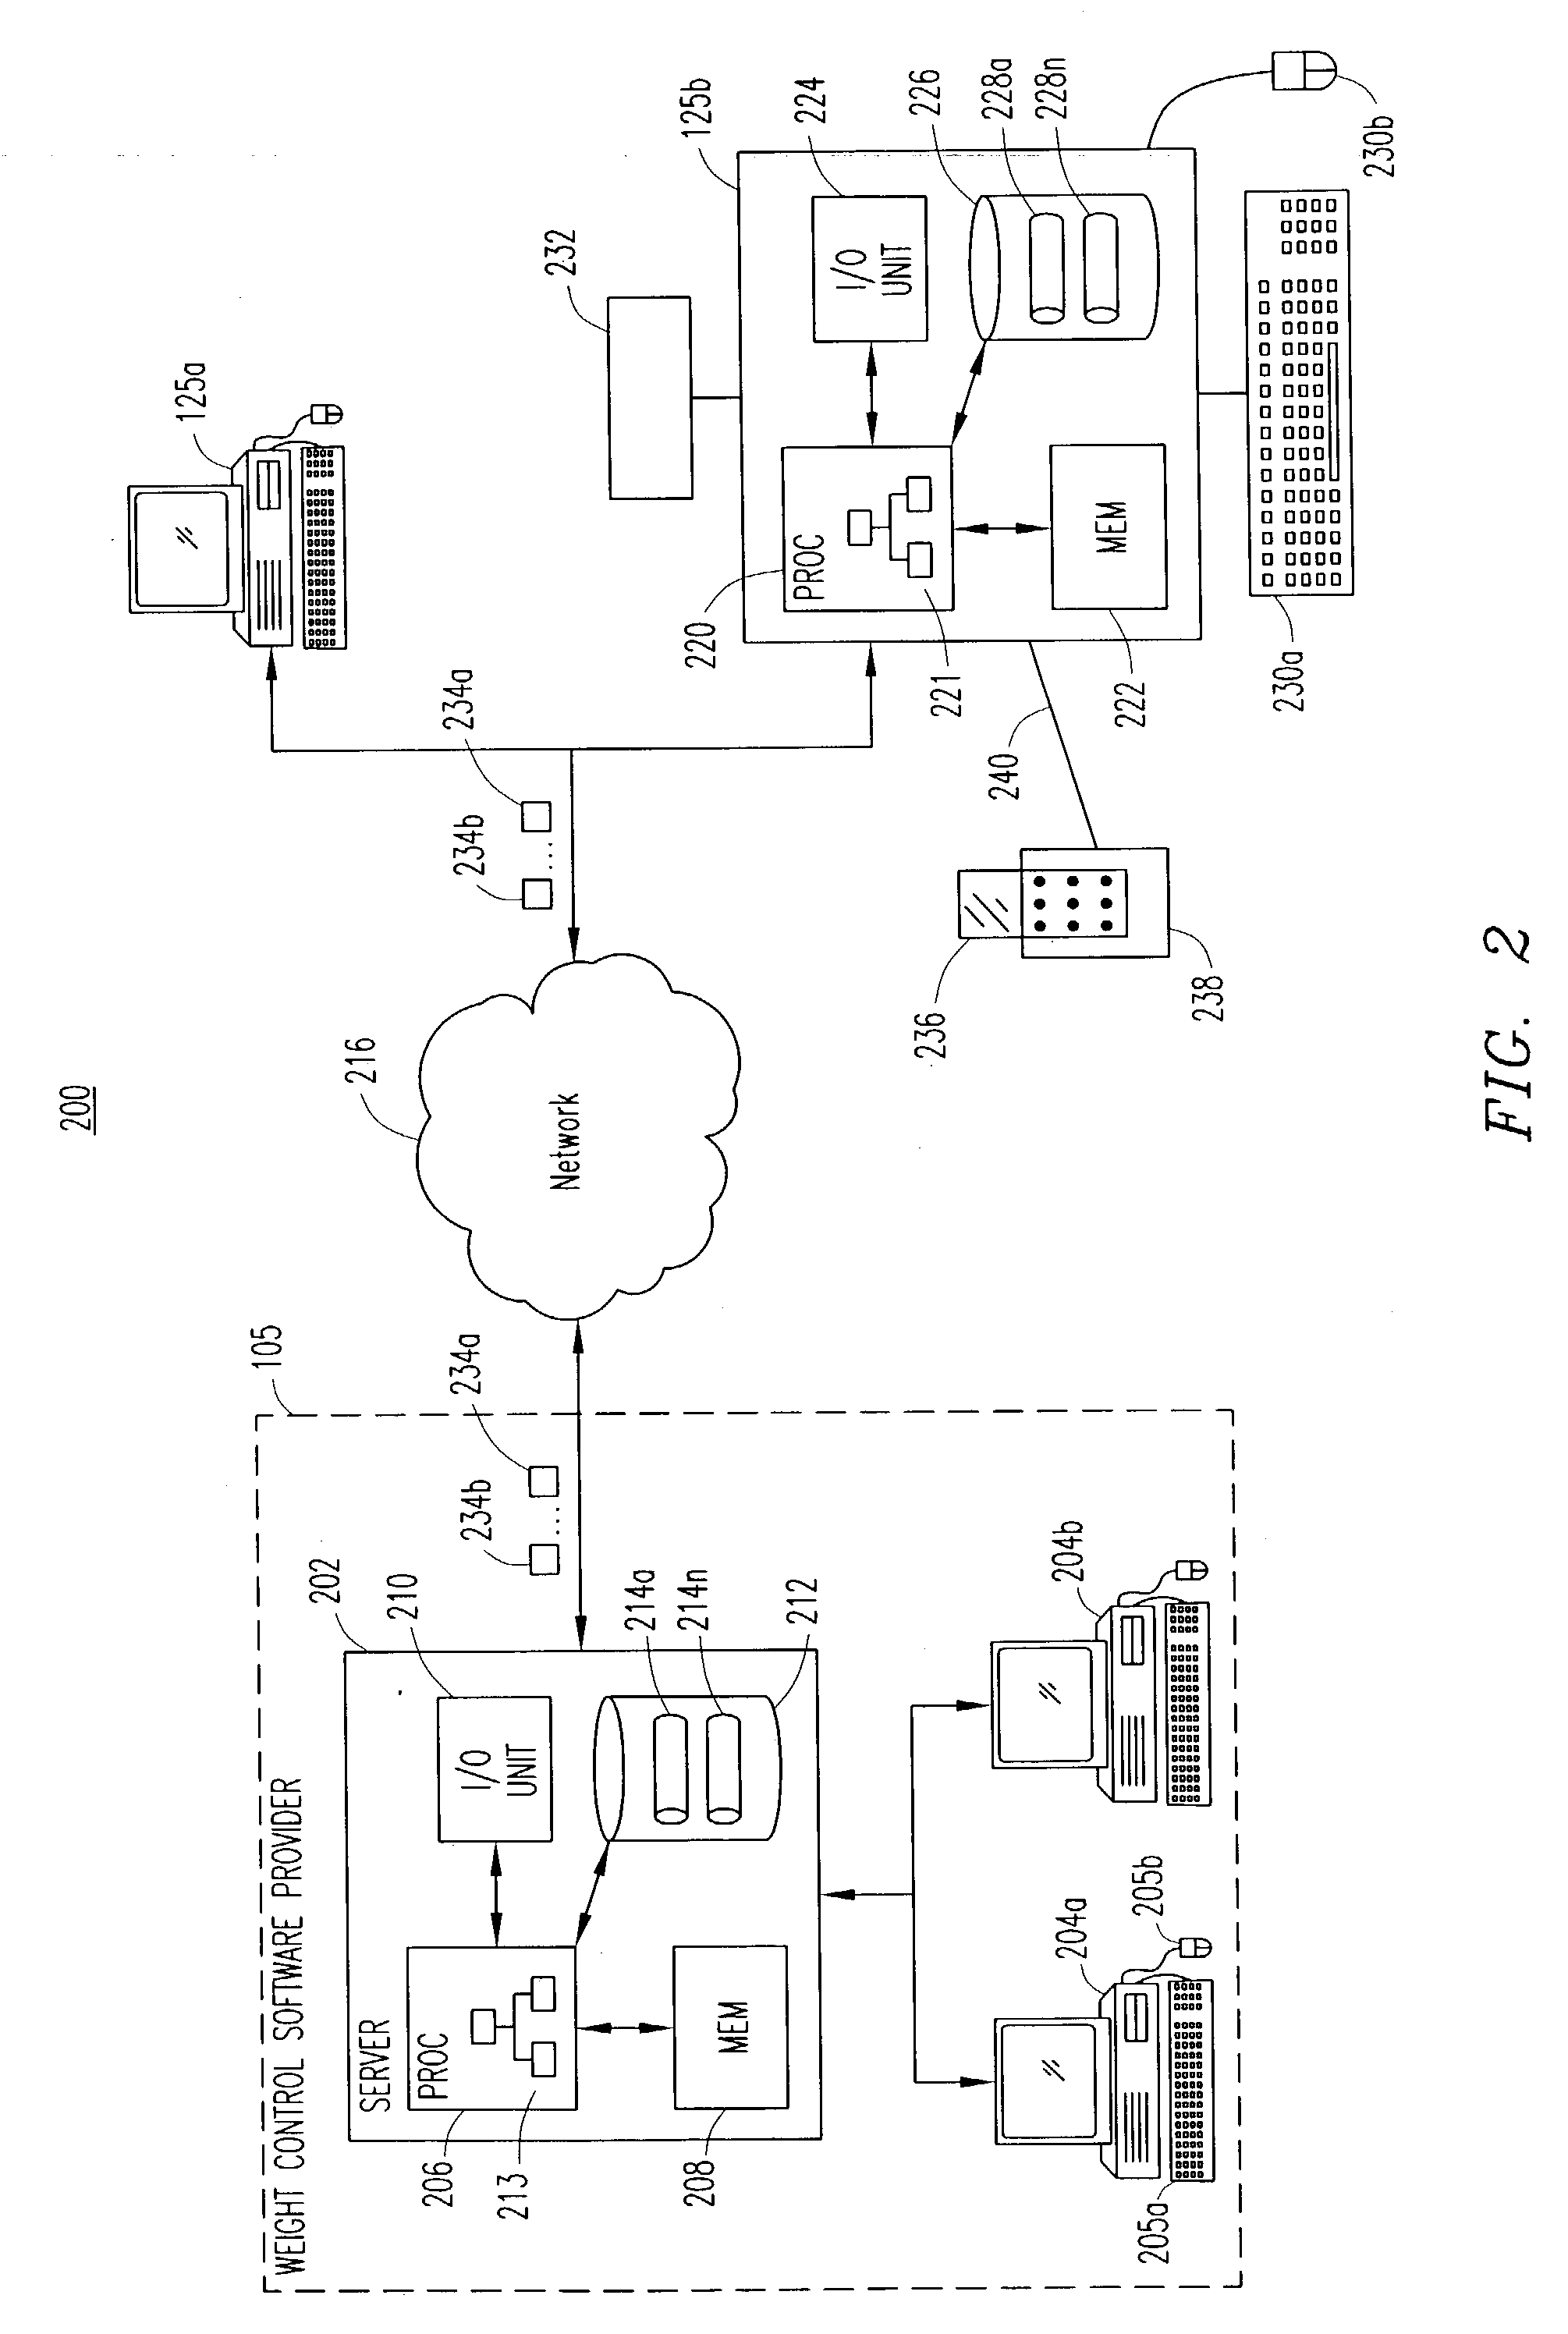 Software and hardware system for enabling weight control